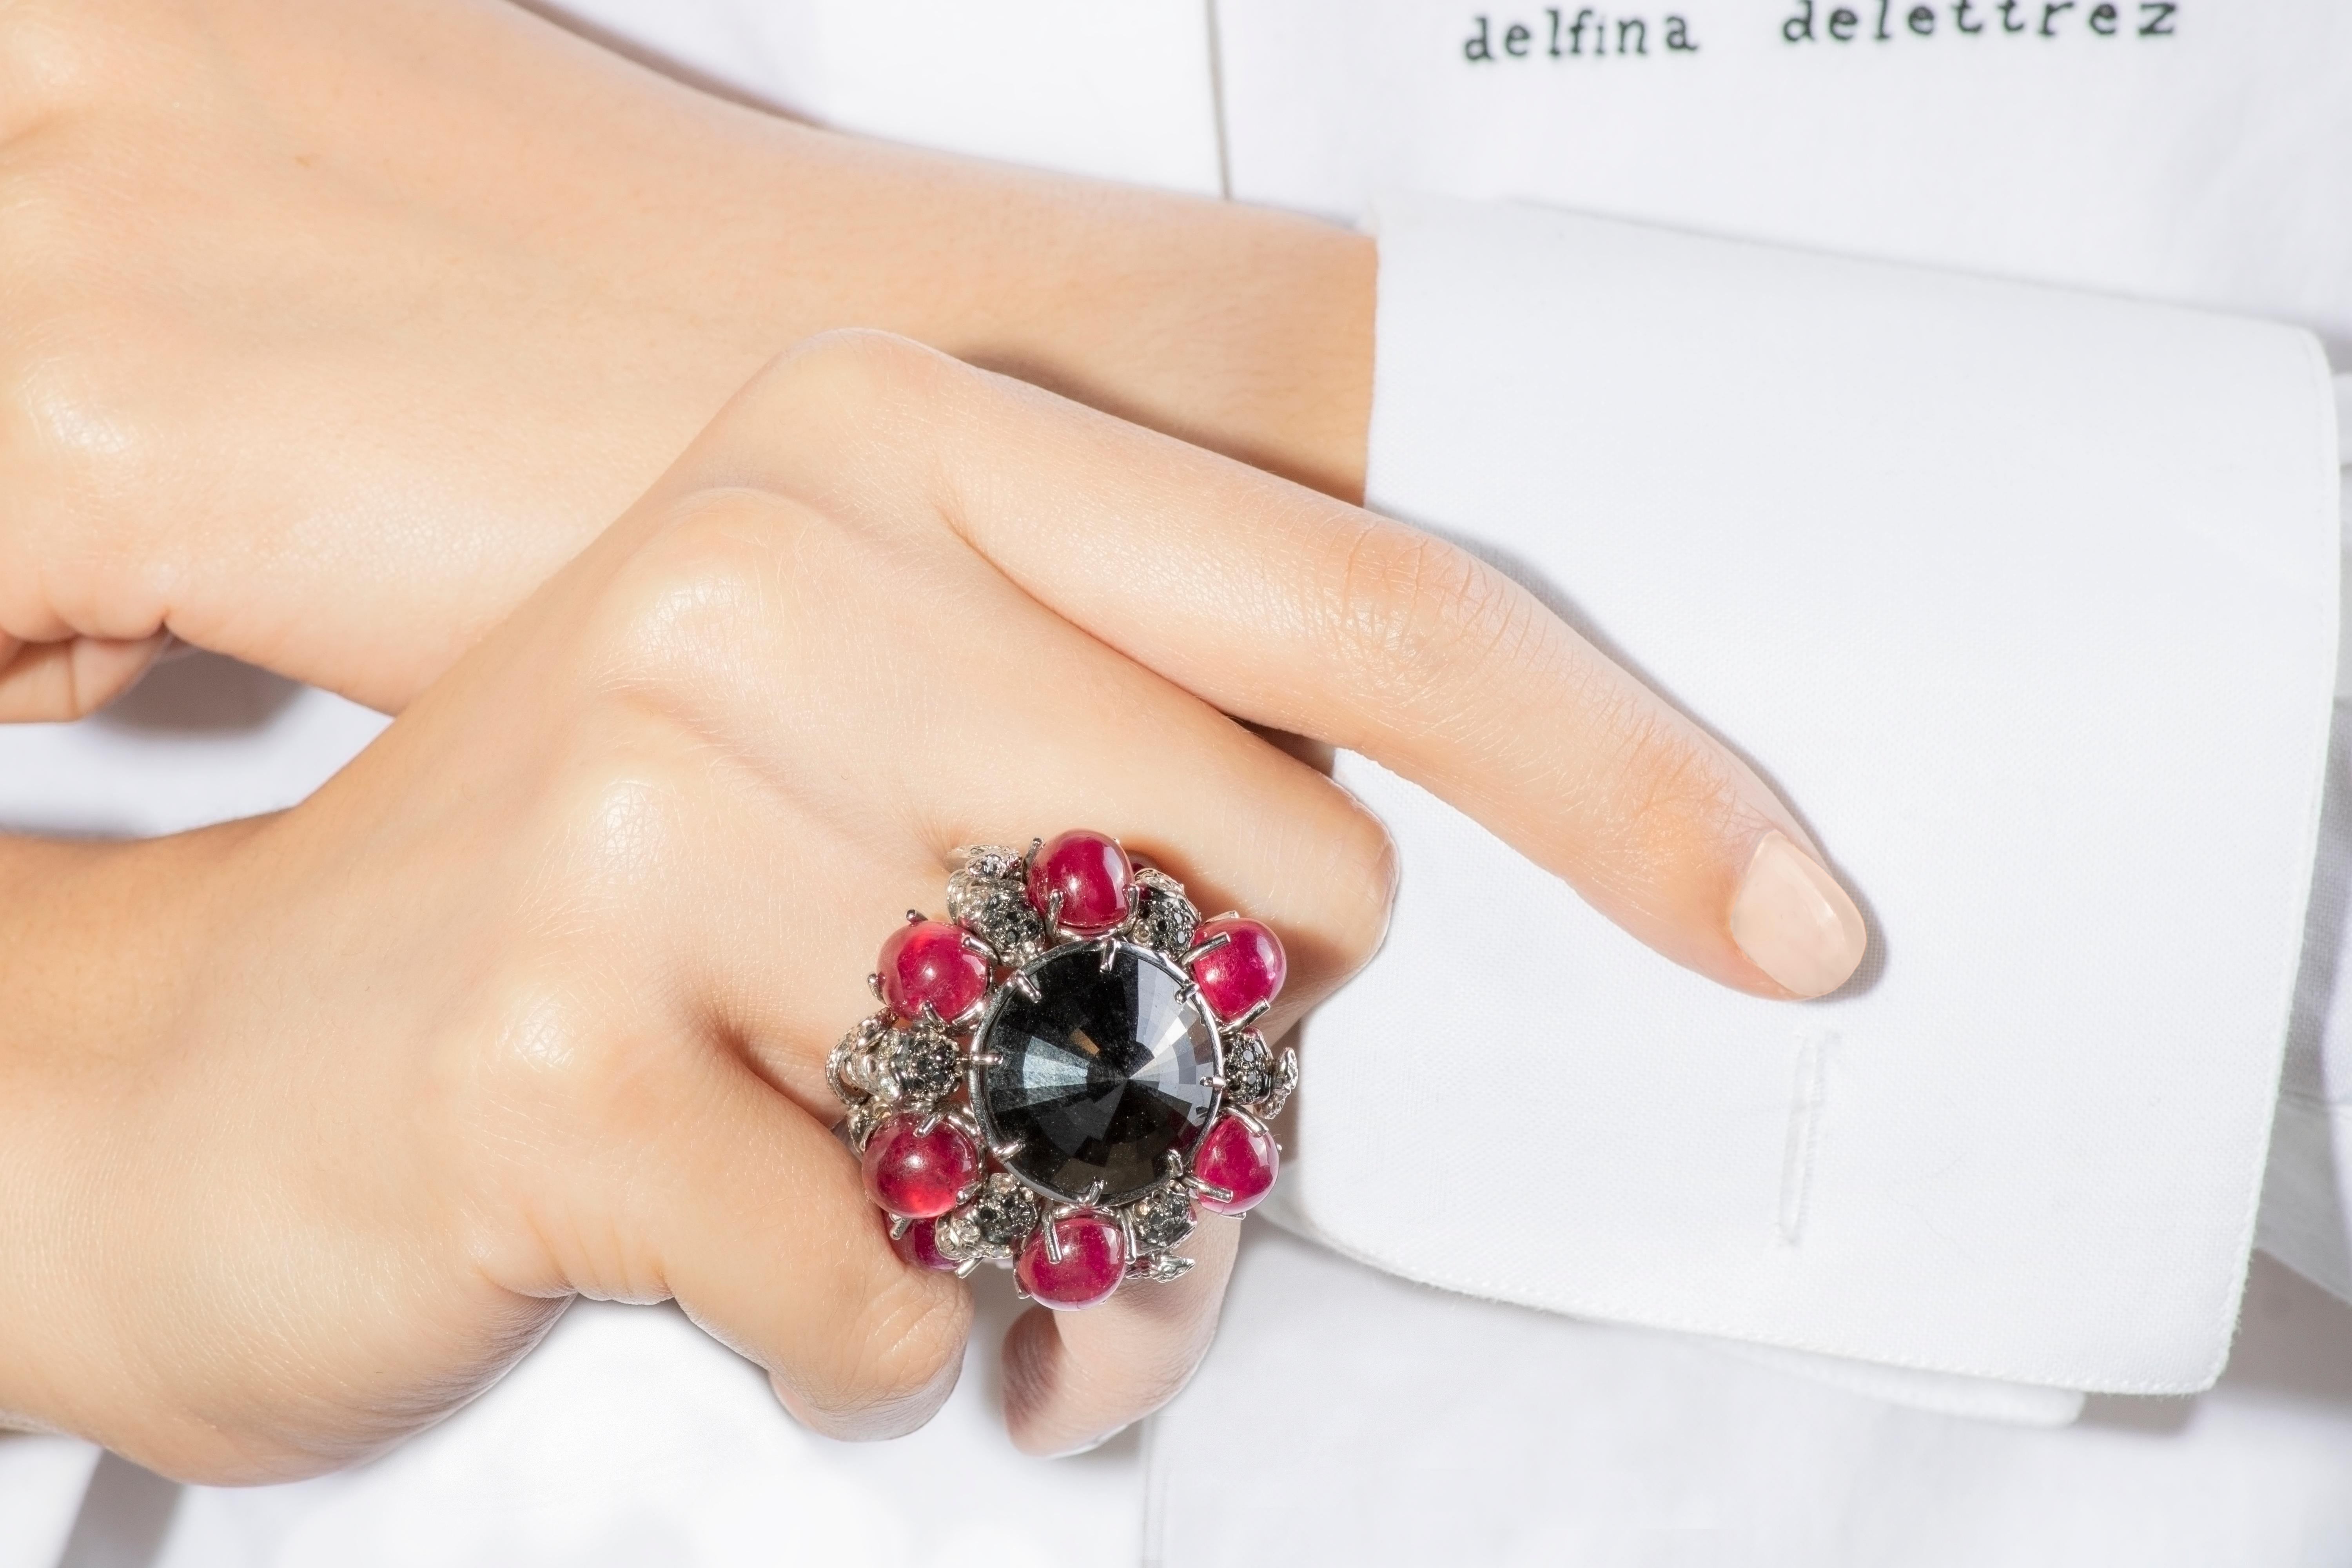 This unique ring by Italian jeweller Delfina Delettrez stands out for its large black diamond 23,00 ct and its design inspired by the Victorian era. It is handcrafted from 30 gr gold and embellished with 8 rubies cabochon 35,87 ct placed around the